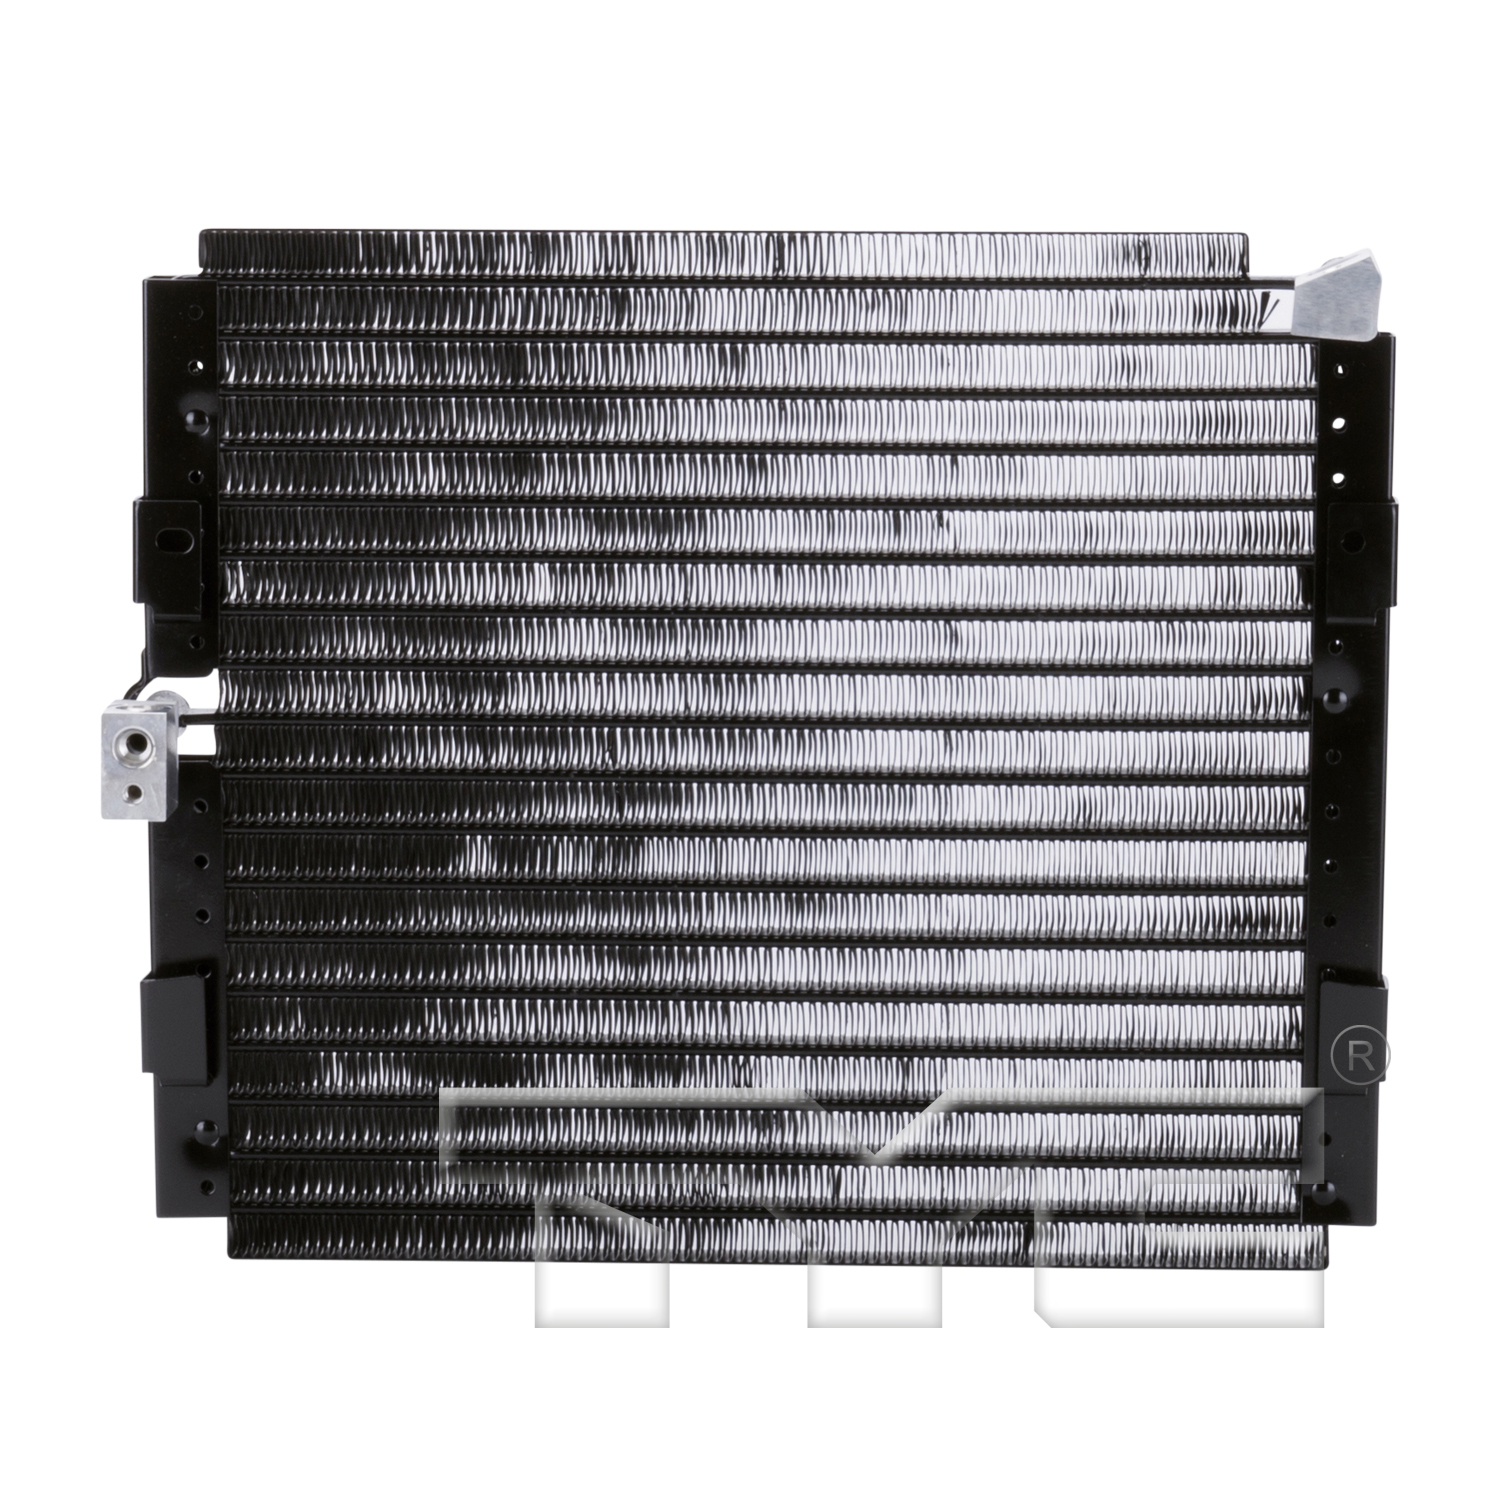 Aftermarket AC CONDENSERS for HONDA - CIVIC DEL SOL, CIVIC DEL SOL,94-95,Air conditioning condenser